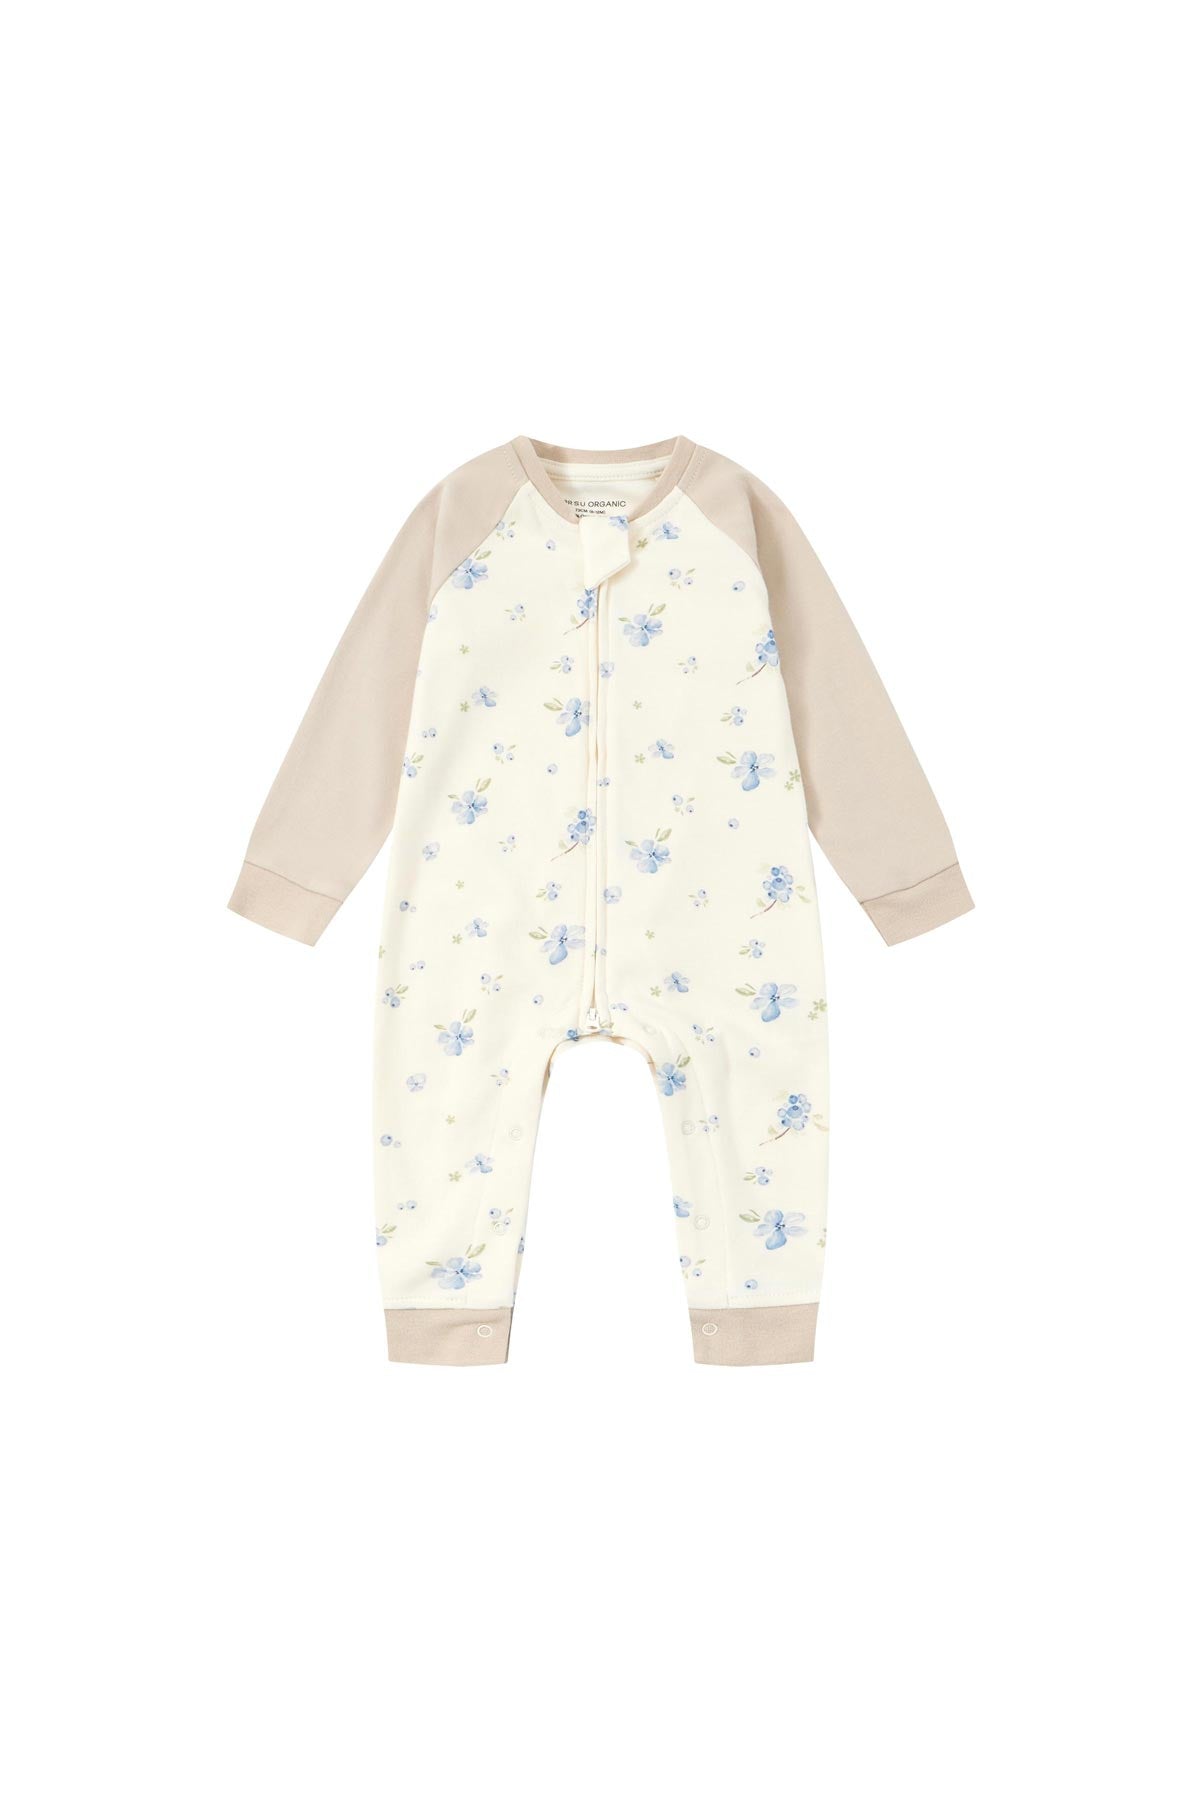 image for Baby Organic Cotton Zip-up Sleeper-Blueberry